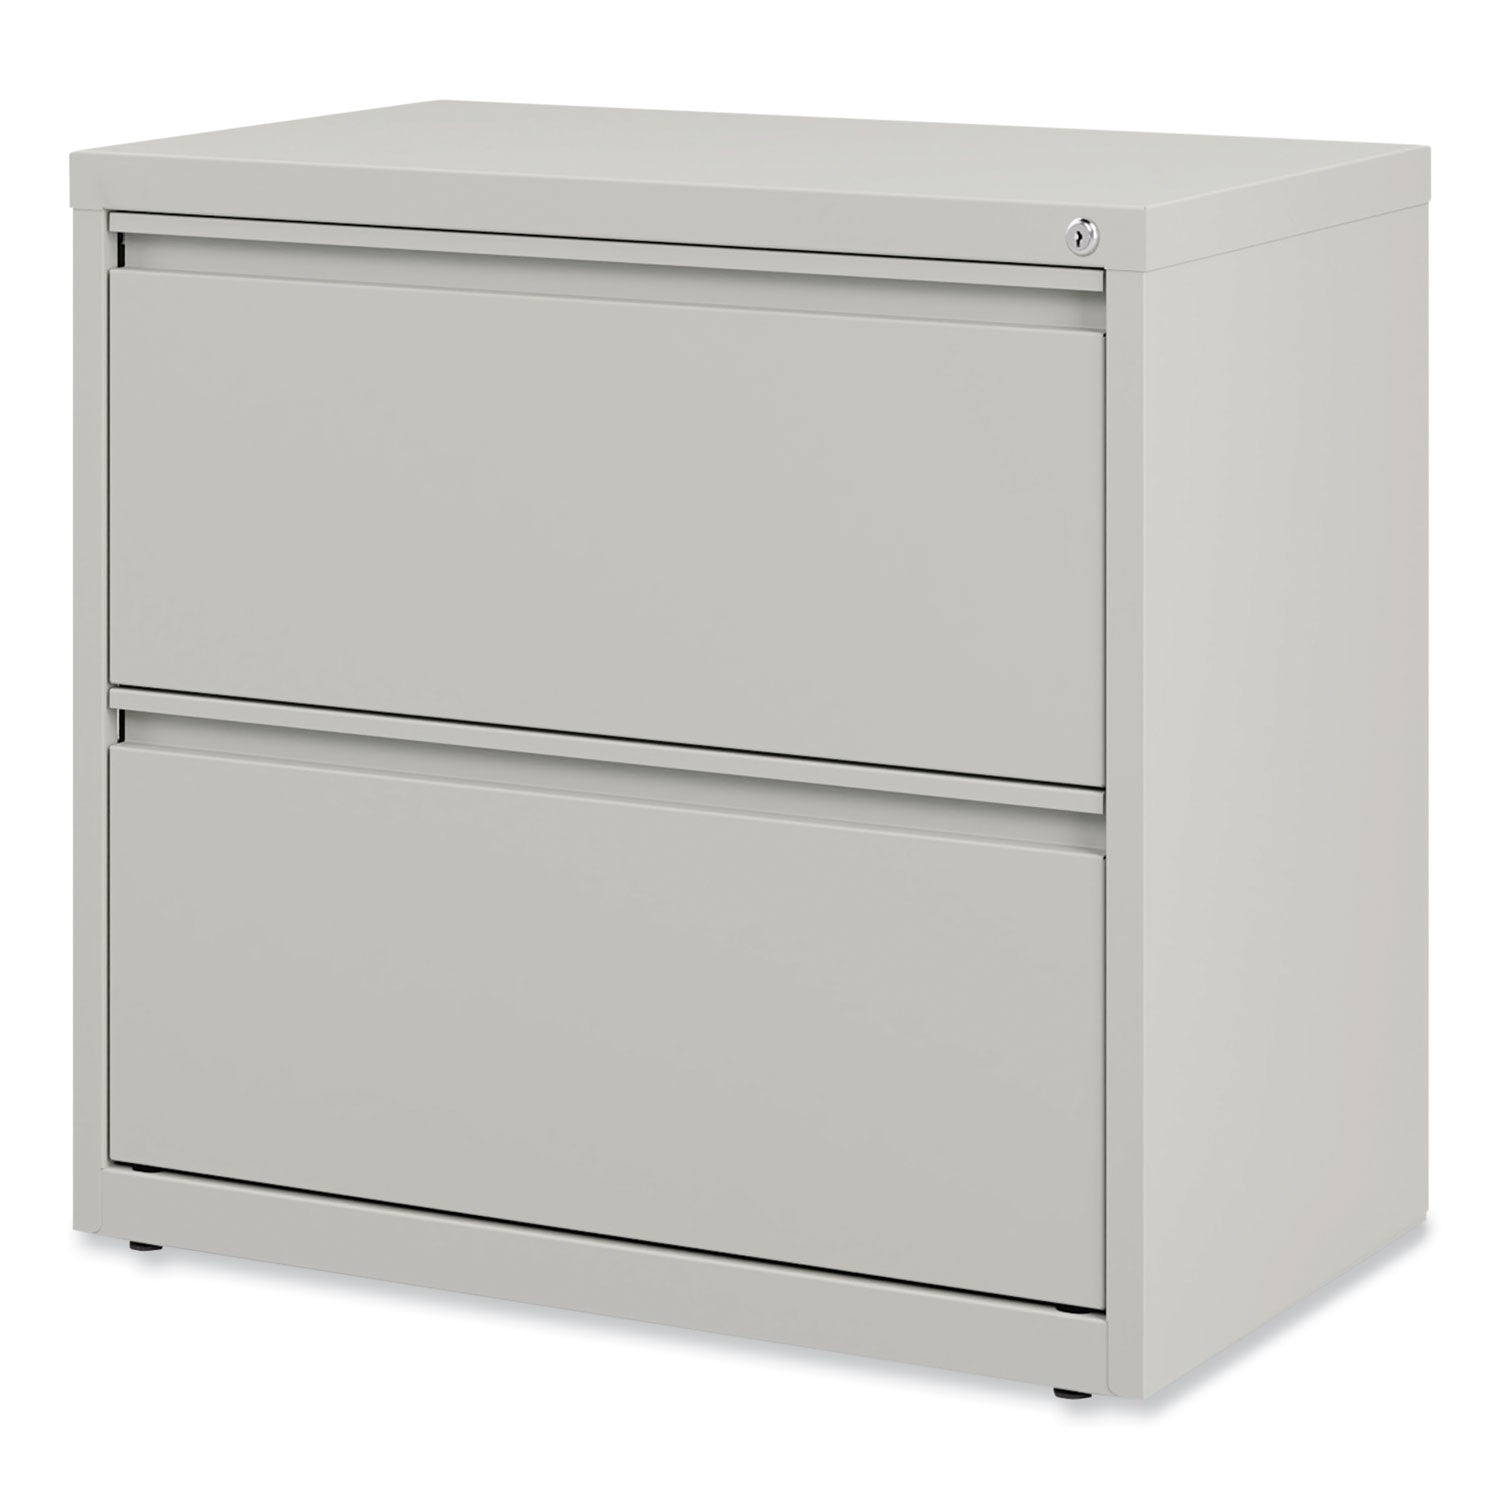 lateral-file-2-legal-letter-size-file-drawers-light-gray-36-x-1863-x-28_alehlf3029lg - 2